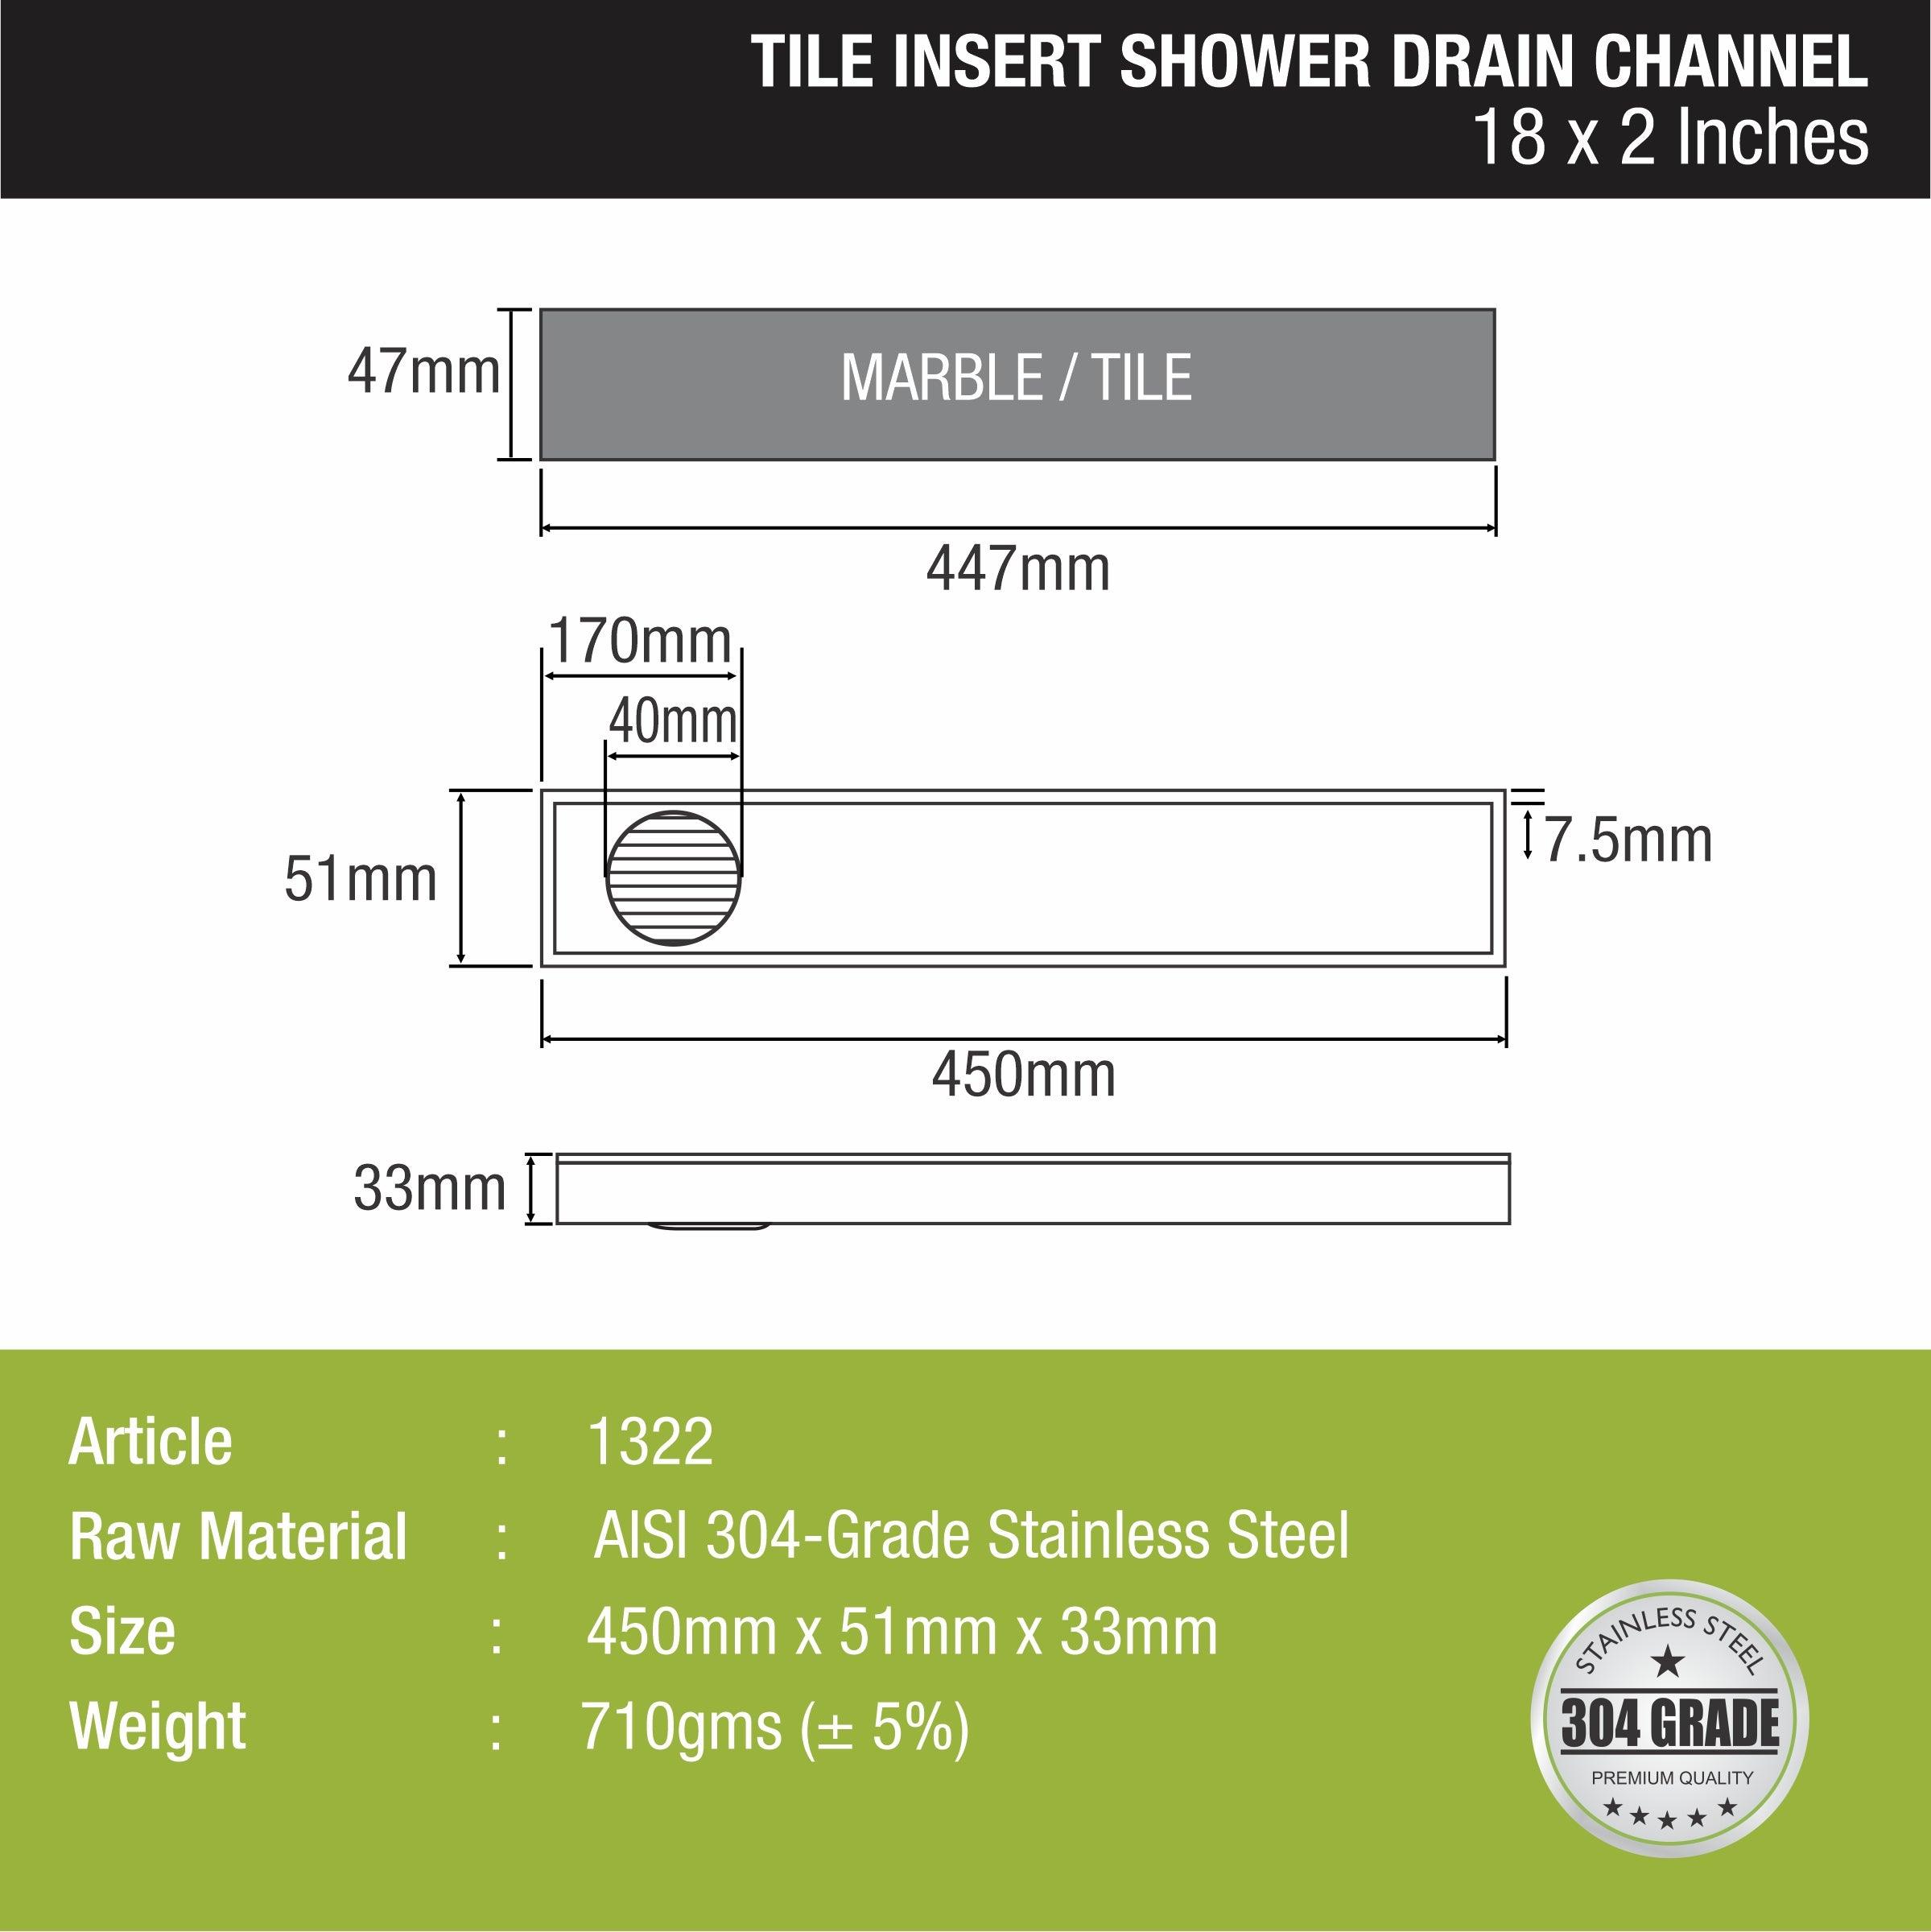 Tile Insert Shower Drain Channel (18 x 2 Inches) sizes and dimensions